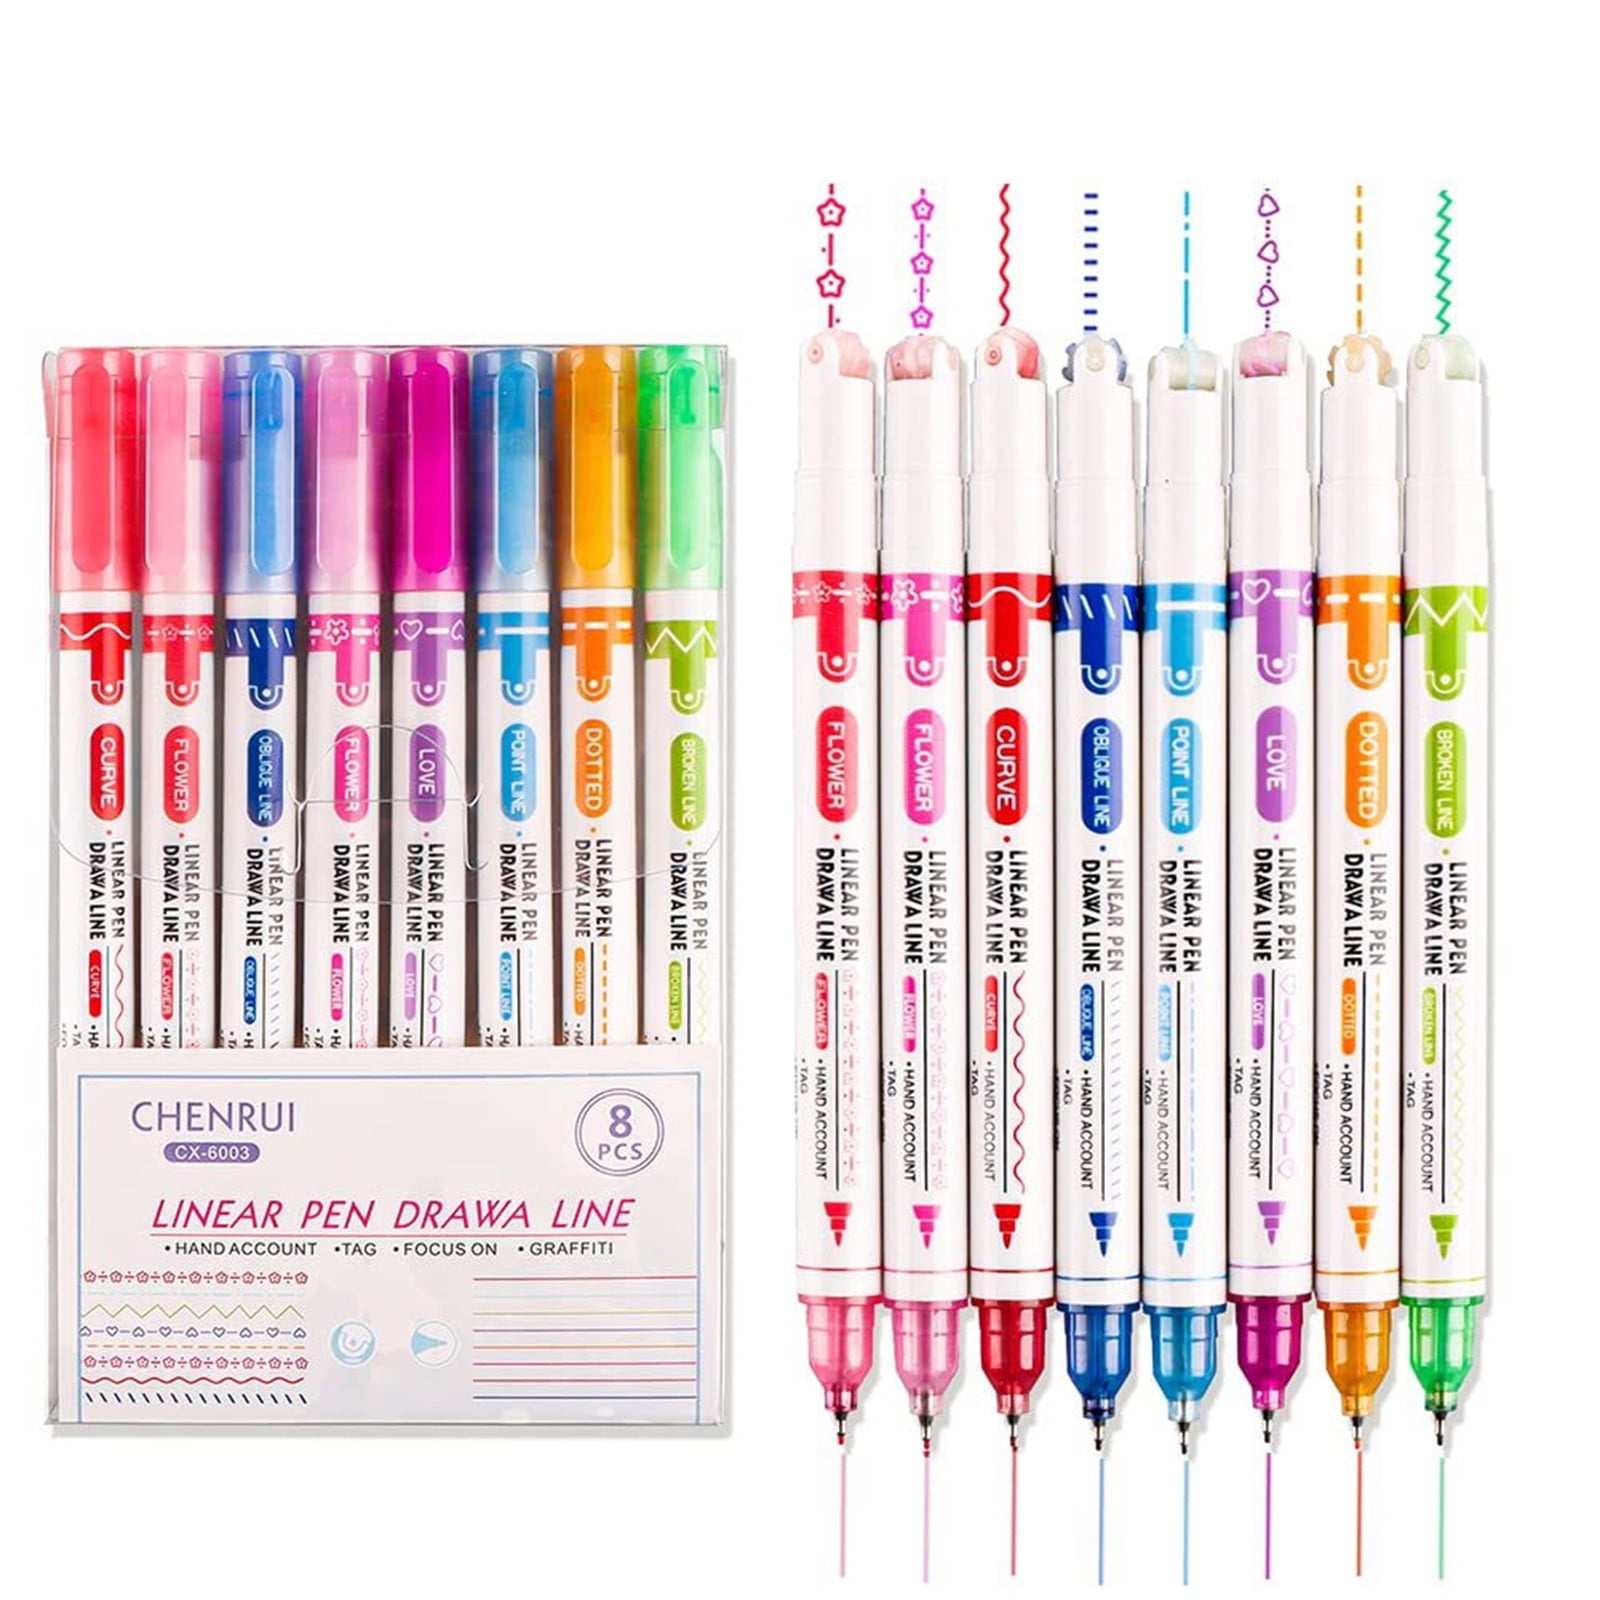  iBayam Dual Tip Markers Brush Pens, 30 Colors Art Marker  Colored Pens for Adult Kids Artist Coloring Journaling Note Taking Planner,  Brush & Fineliner Tip : Arts, Crafts & Sewing